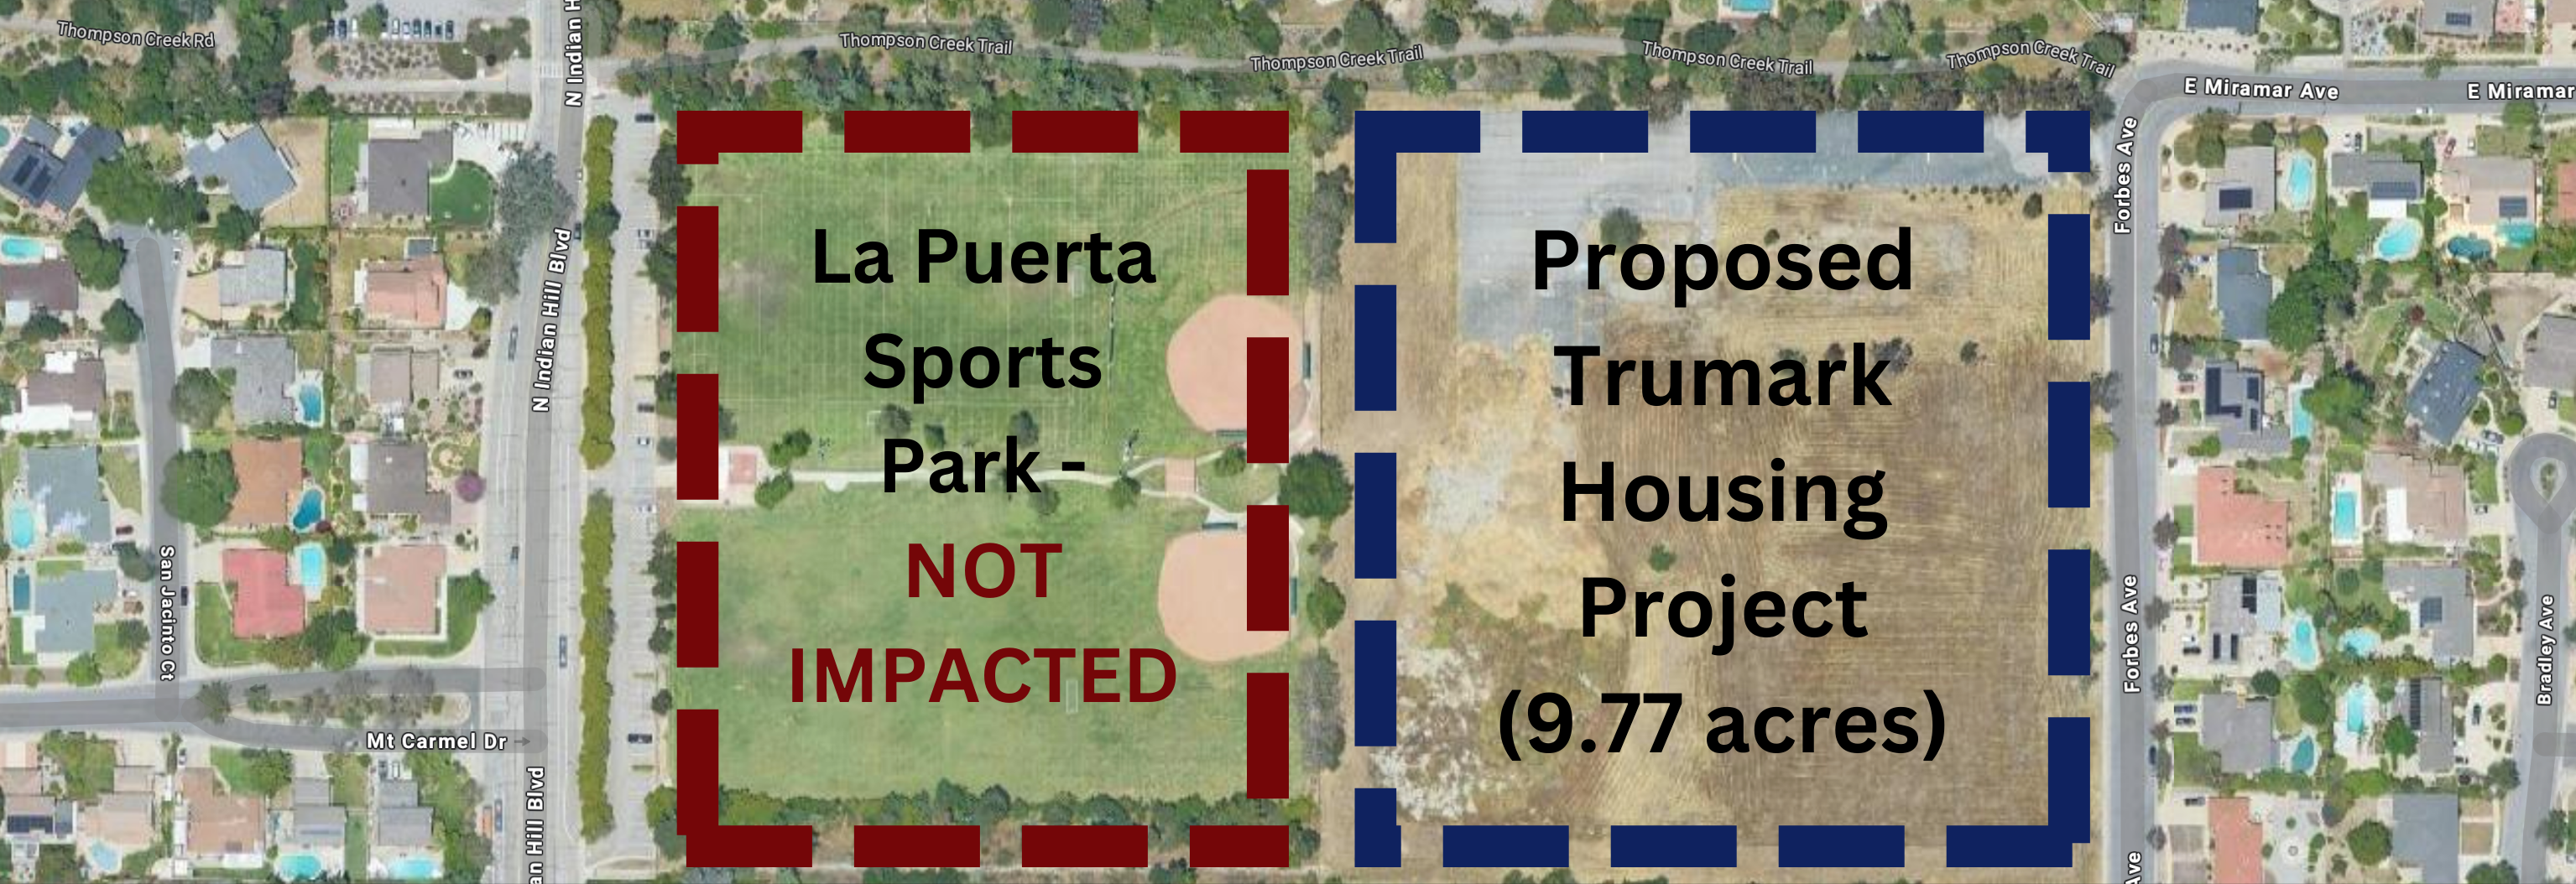 Image of the separation between the La Puerta Sports Park and the surplus land for sale.